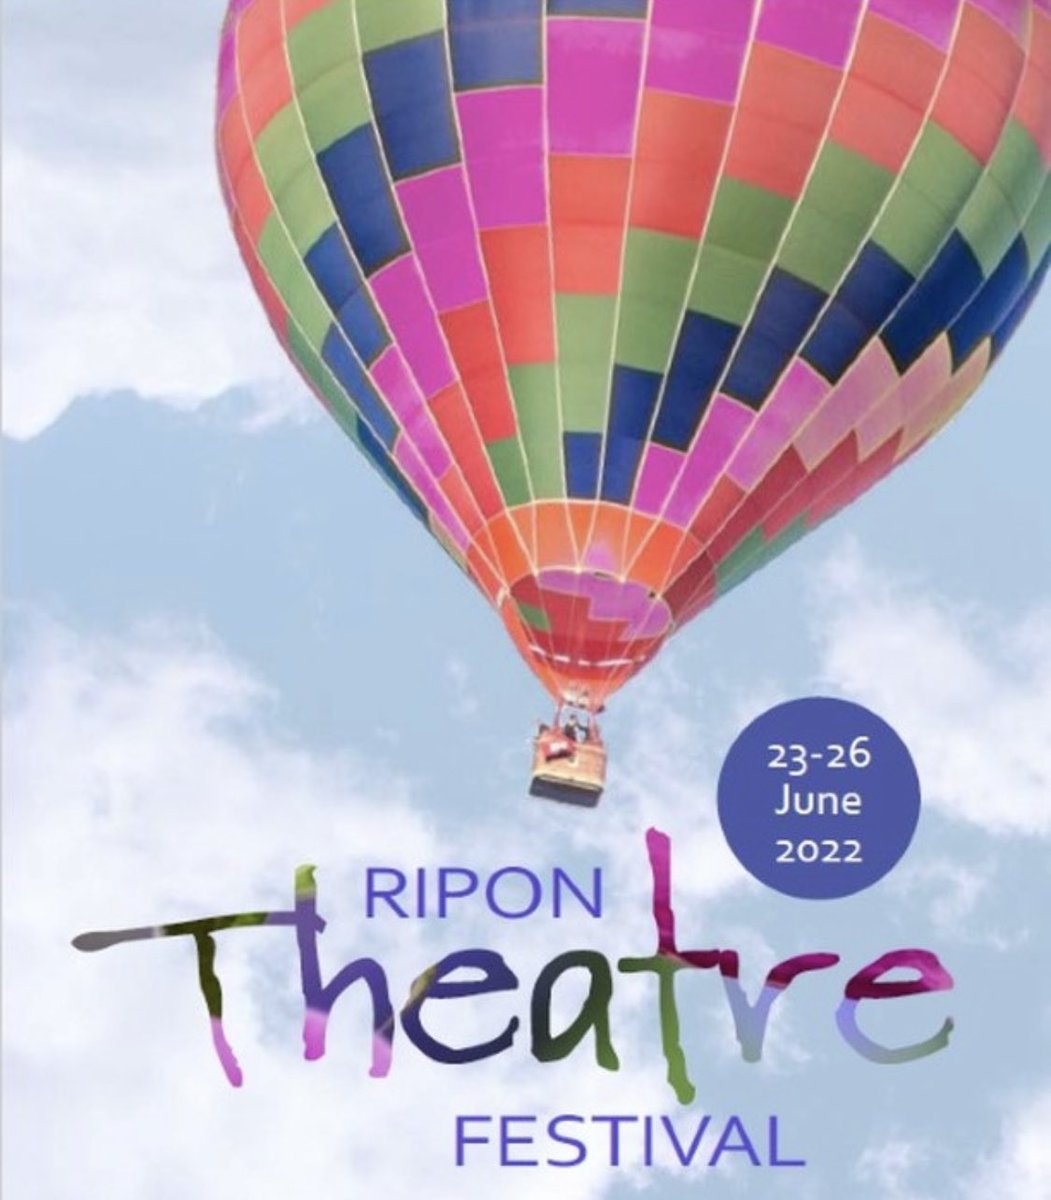 The Festival for Families
With over 40 events taking place over 4 days, Ripon Theatre Festival is making it easier for families to plan their festival weekend. Check out the at-a-glance post for families here: ripontogether.com/festival-for-f… #ripontheatrefestival